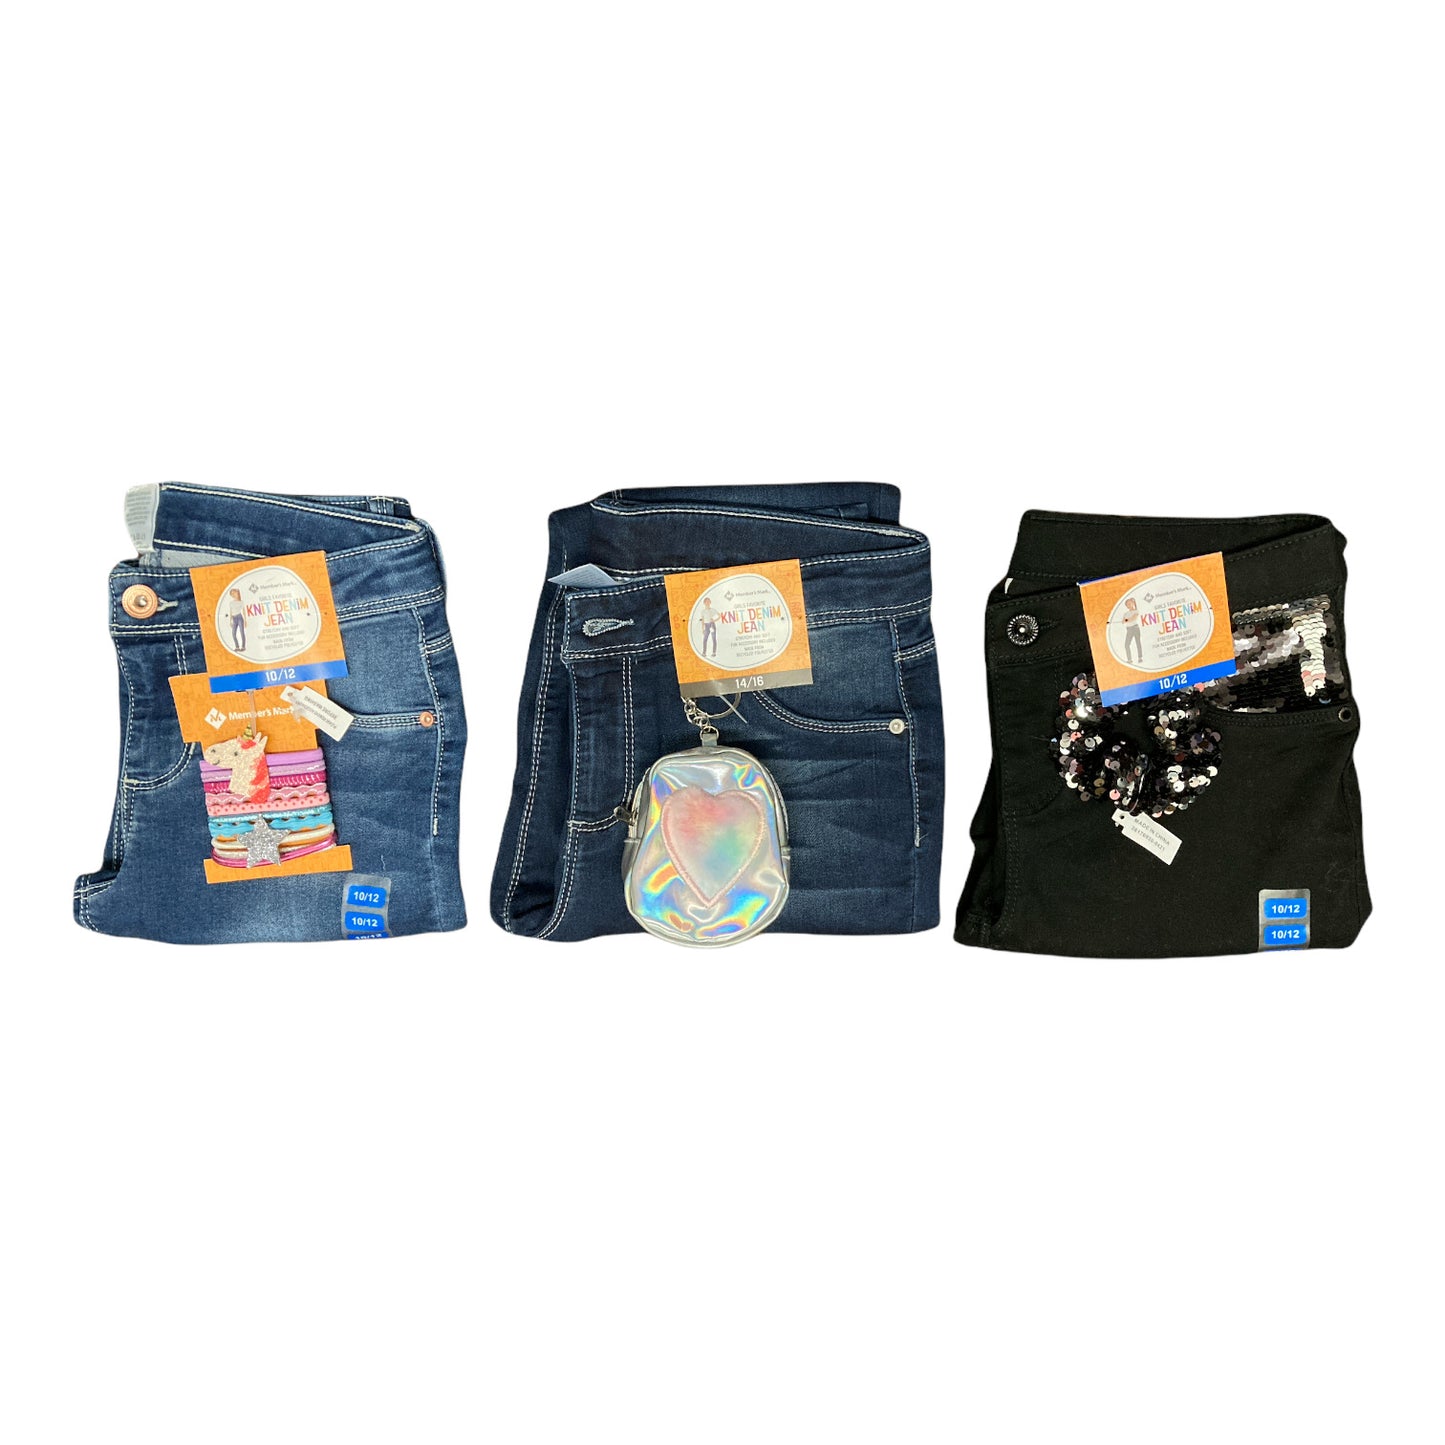 Member's Mark Girl's Favorite Knit Mid Rise Denim Jeans With Fun Accessory